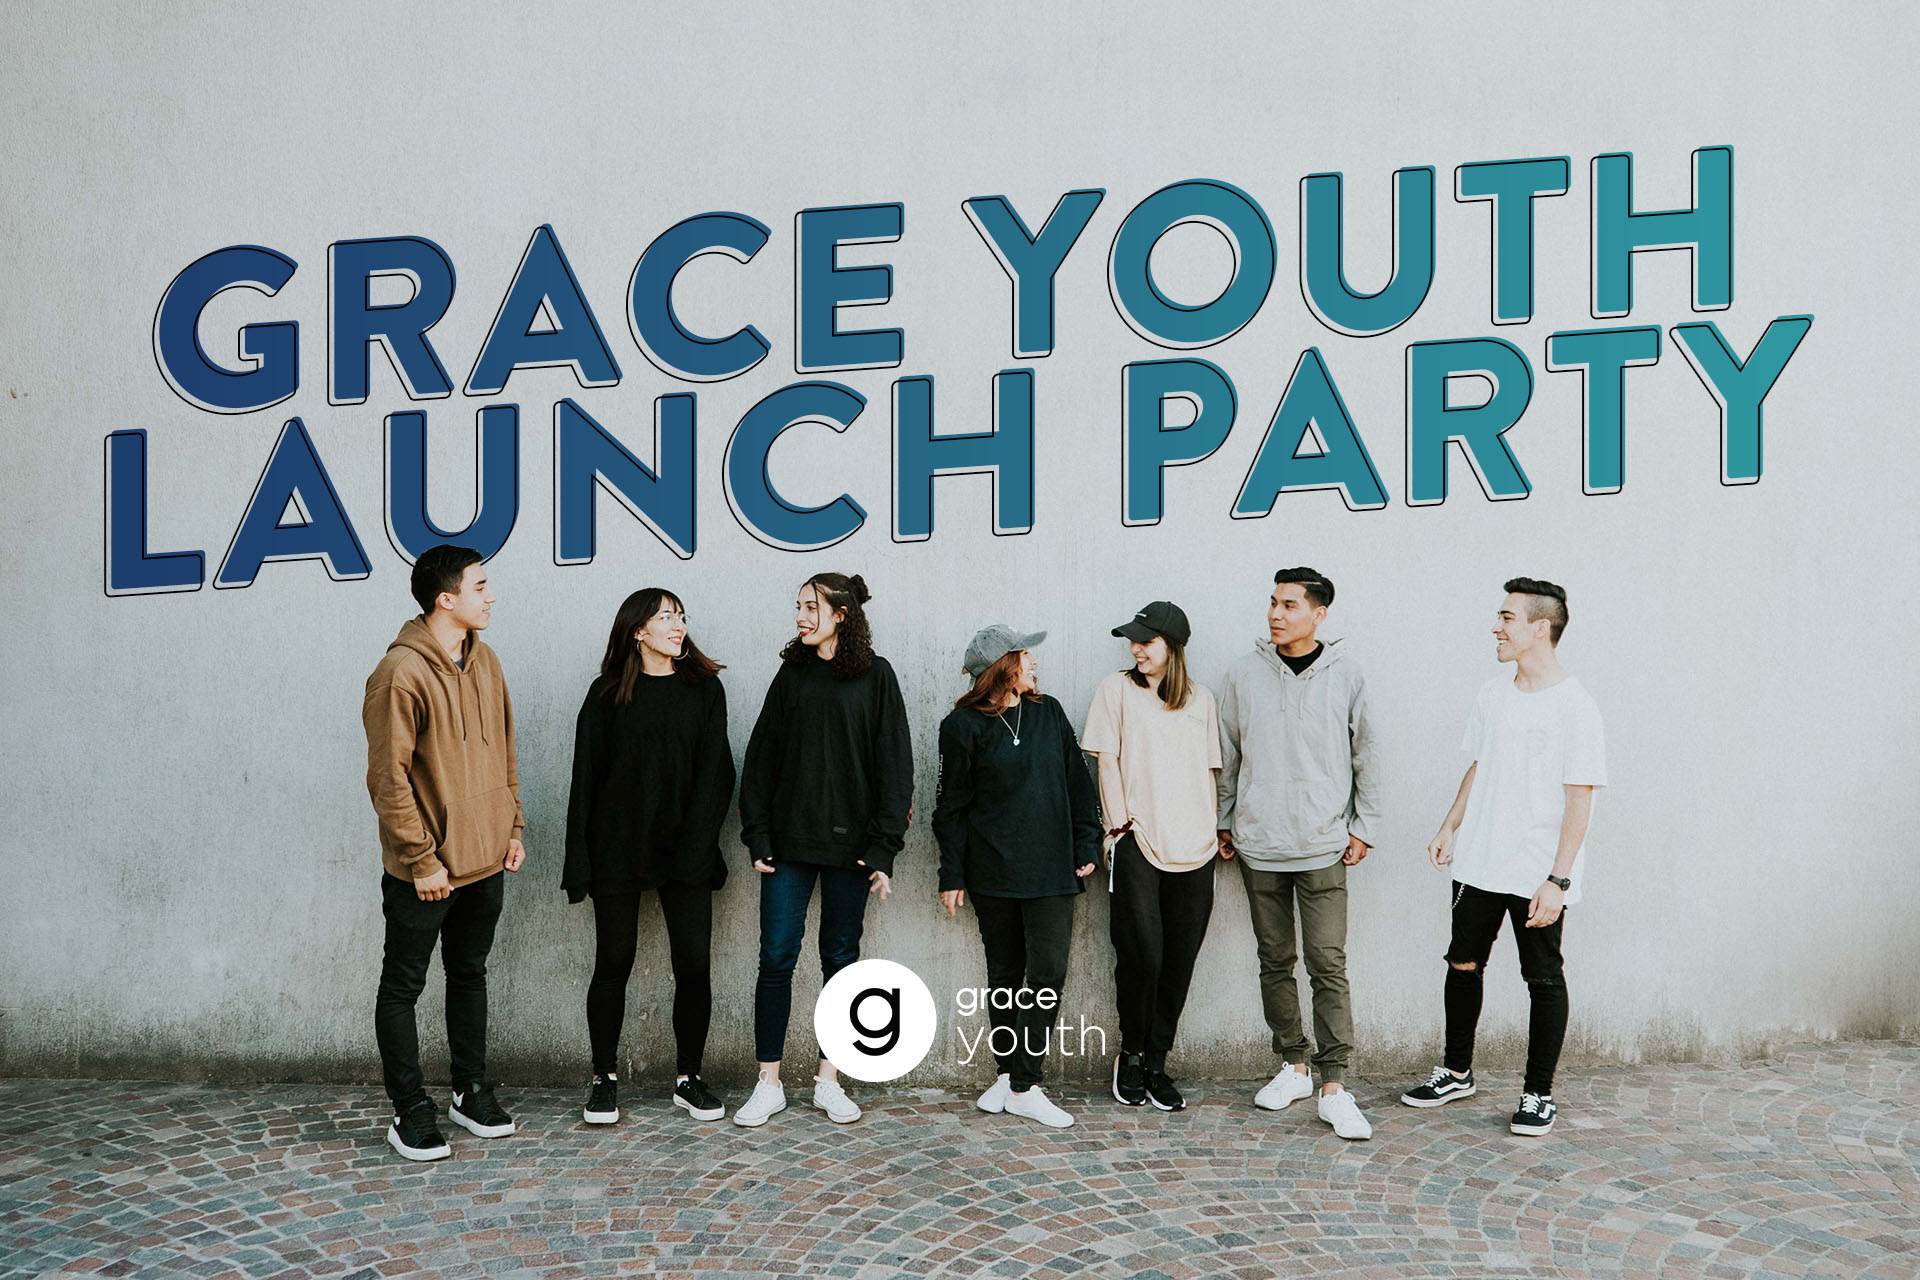 Link to Grace Youth Launch Party page